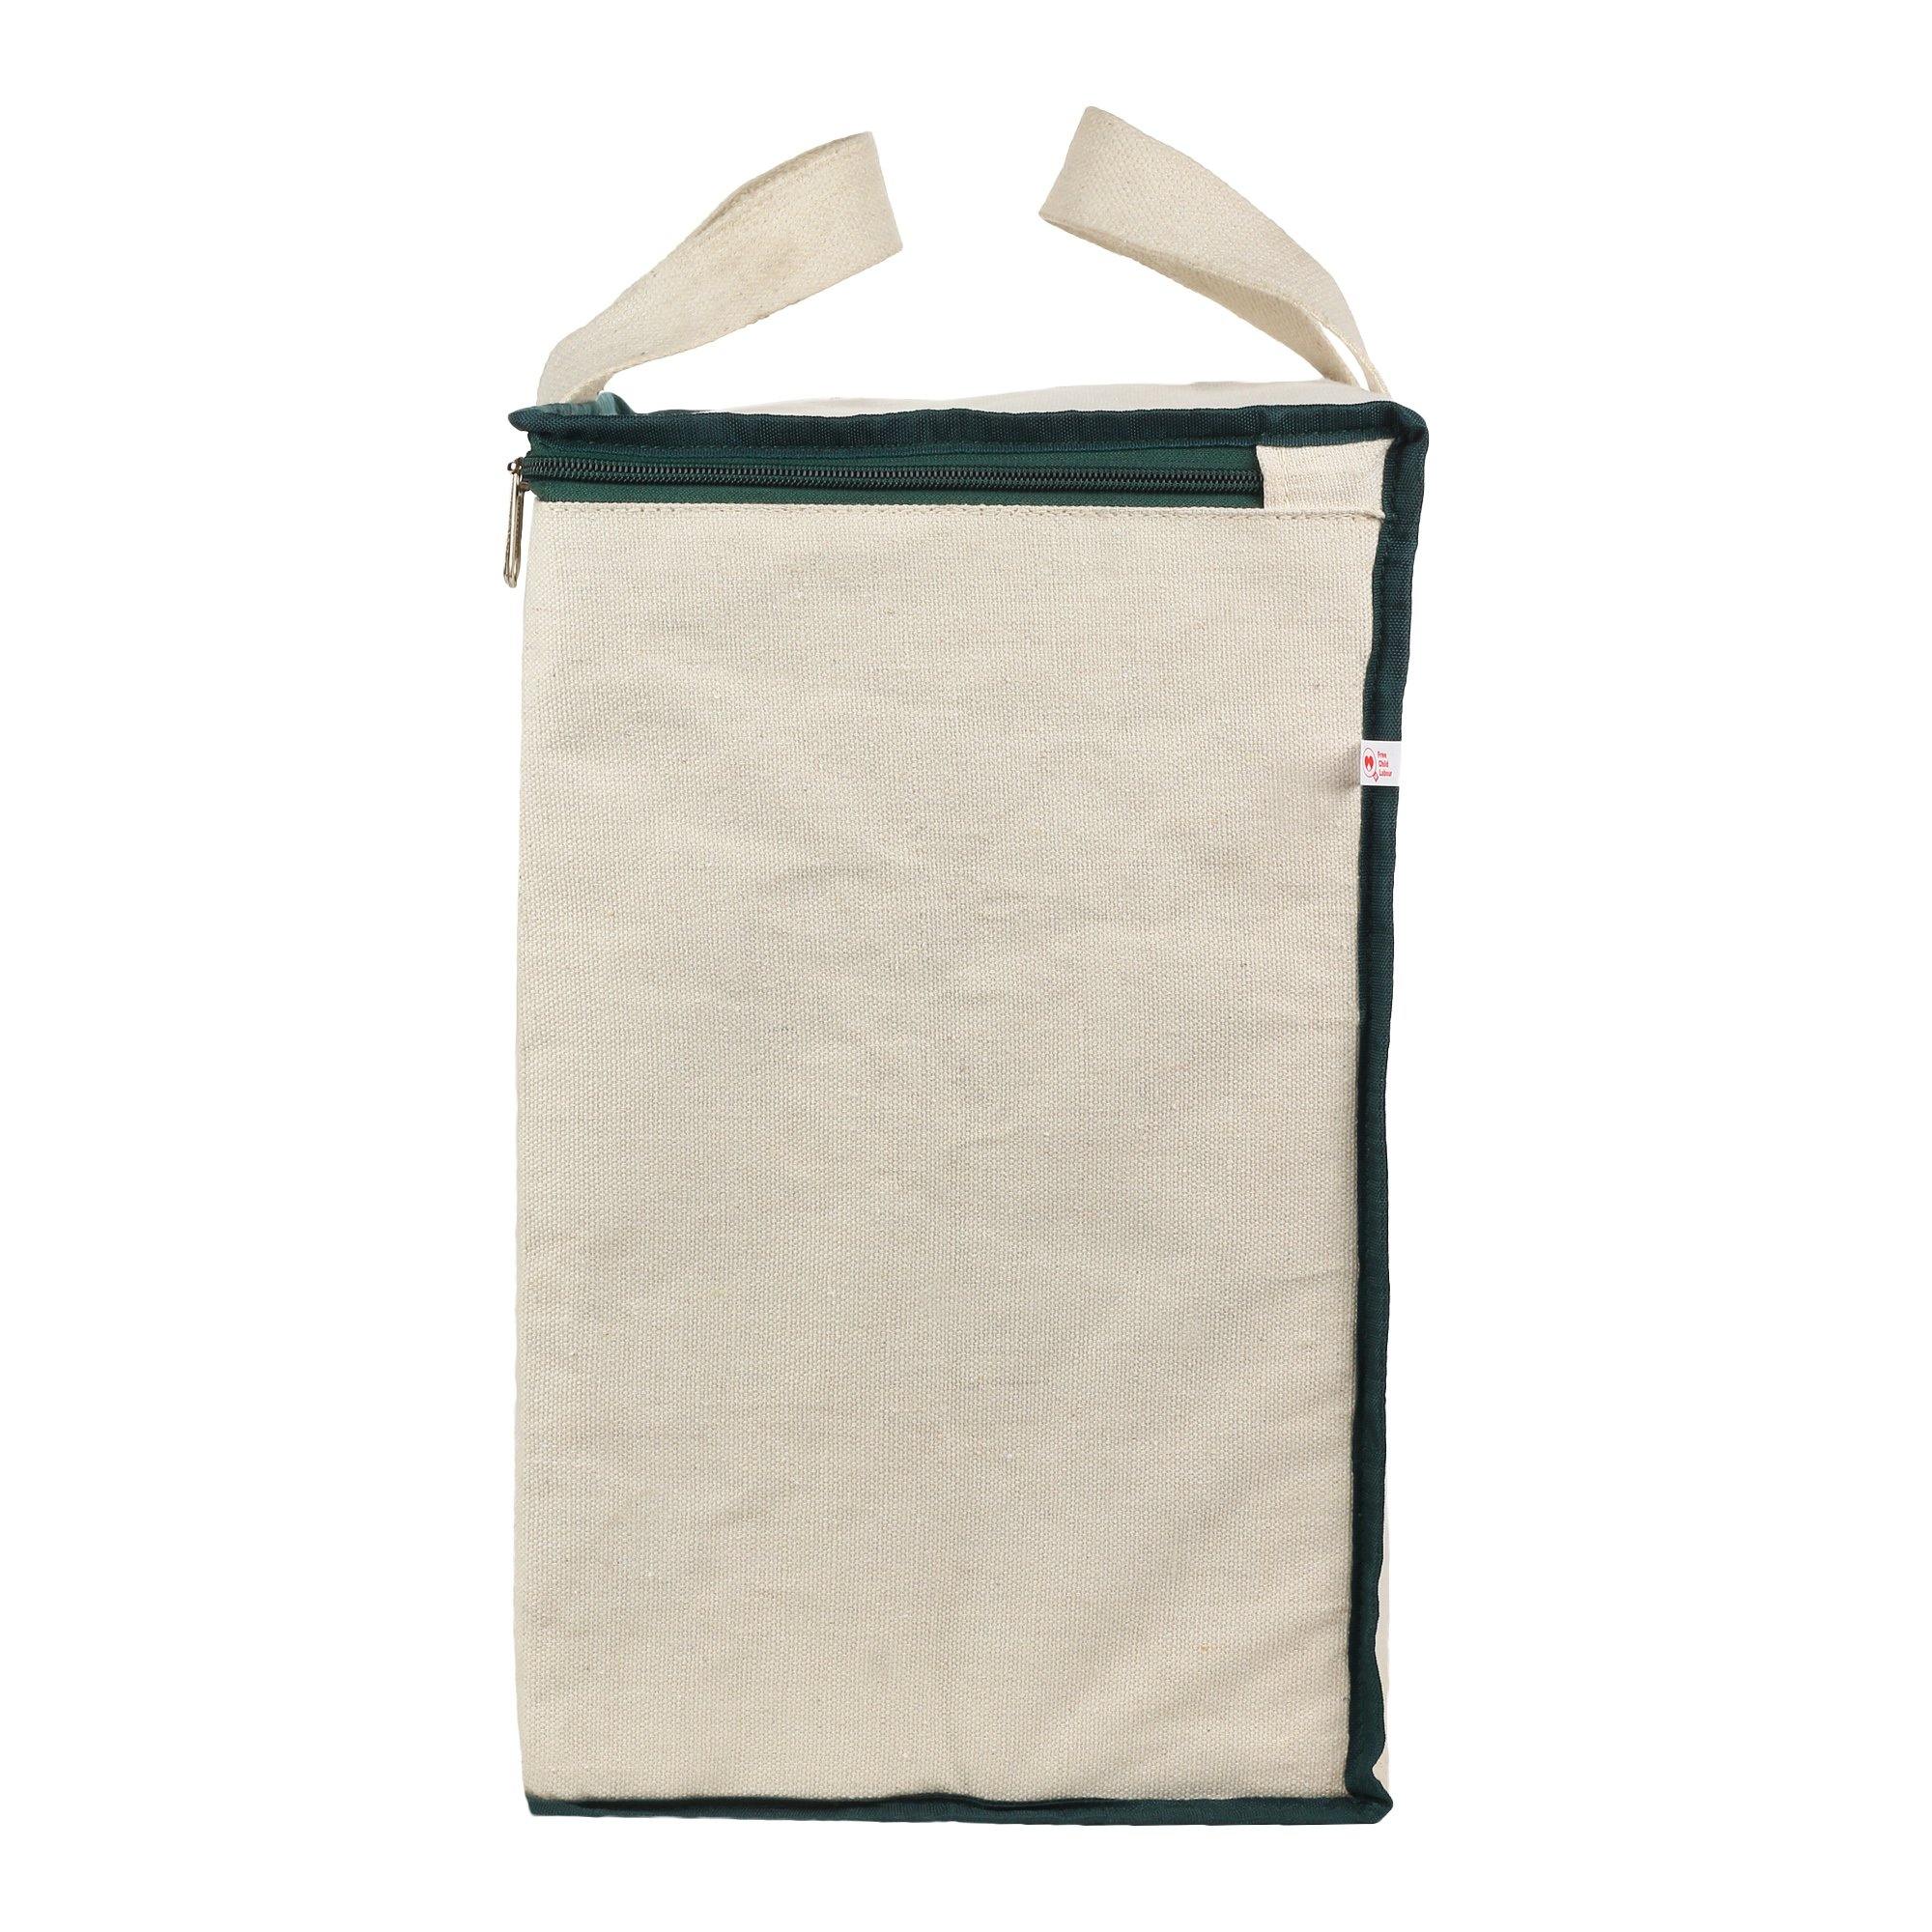 Canvas Bag with Cotton Handles and Covers Zip Bags